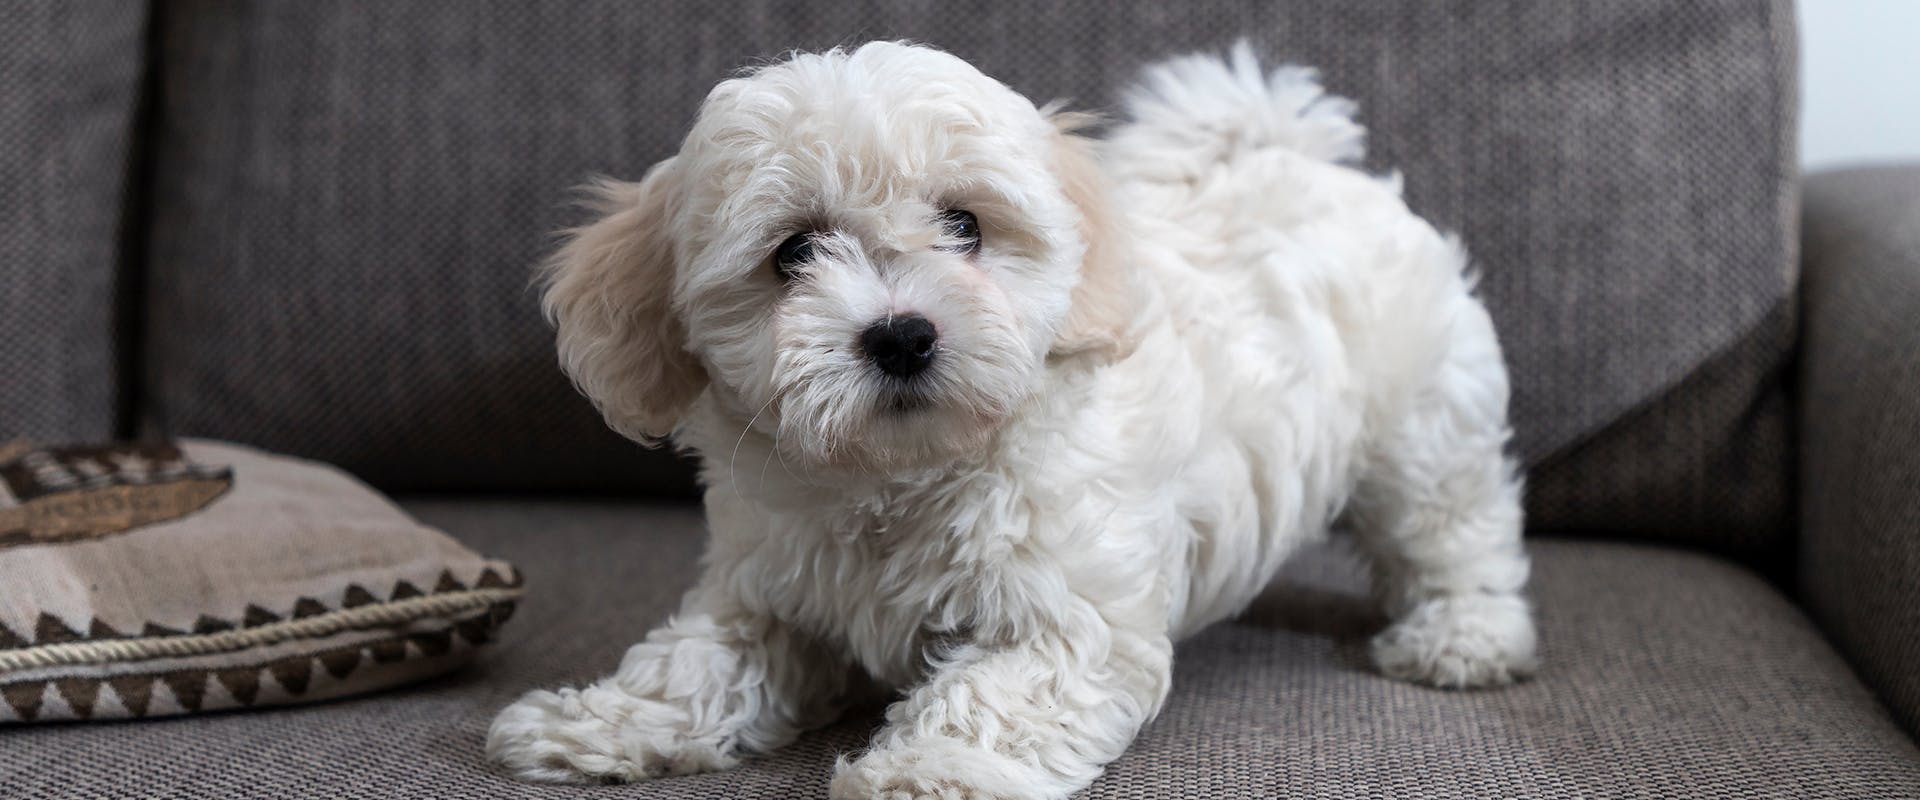 A cute Poochon puppy standing excitedly on a grey sofa, ready to pounce